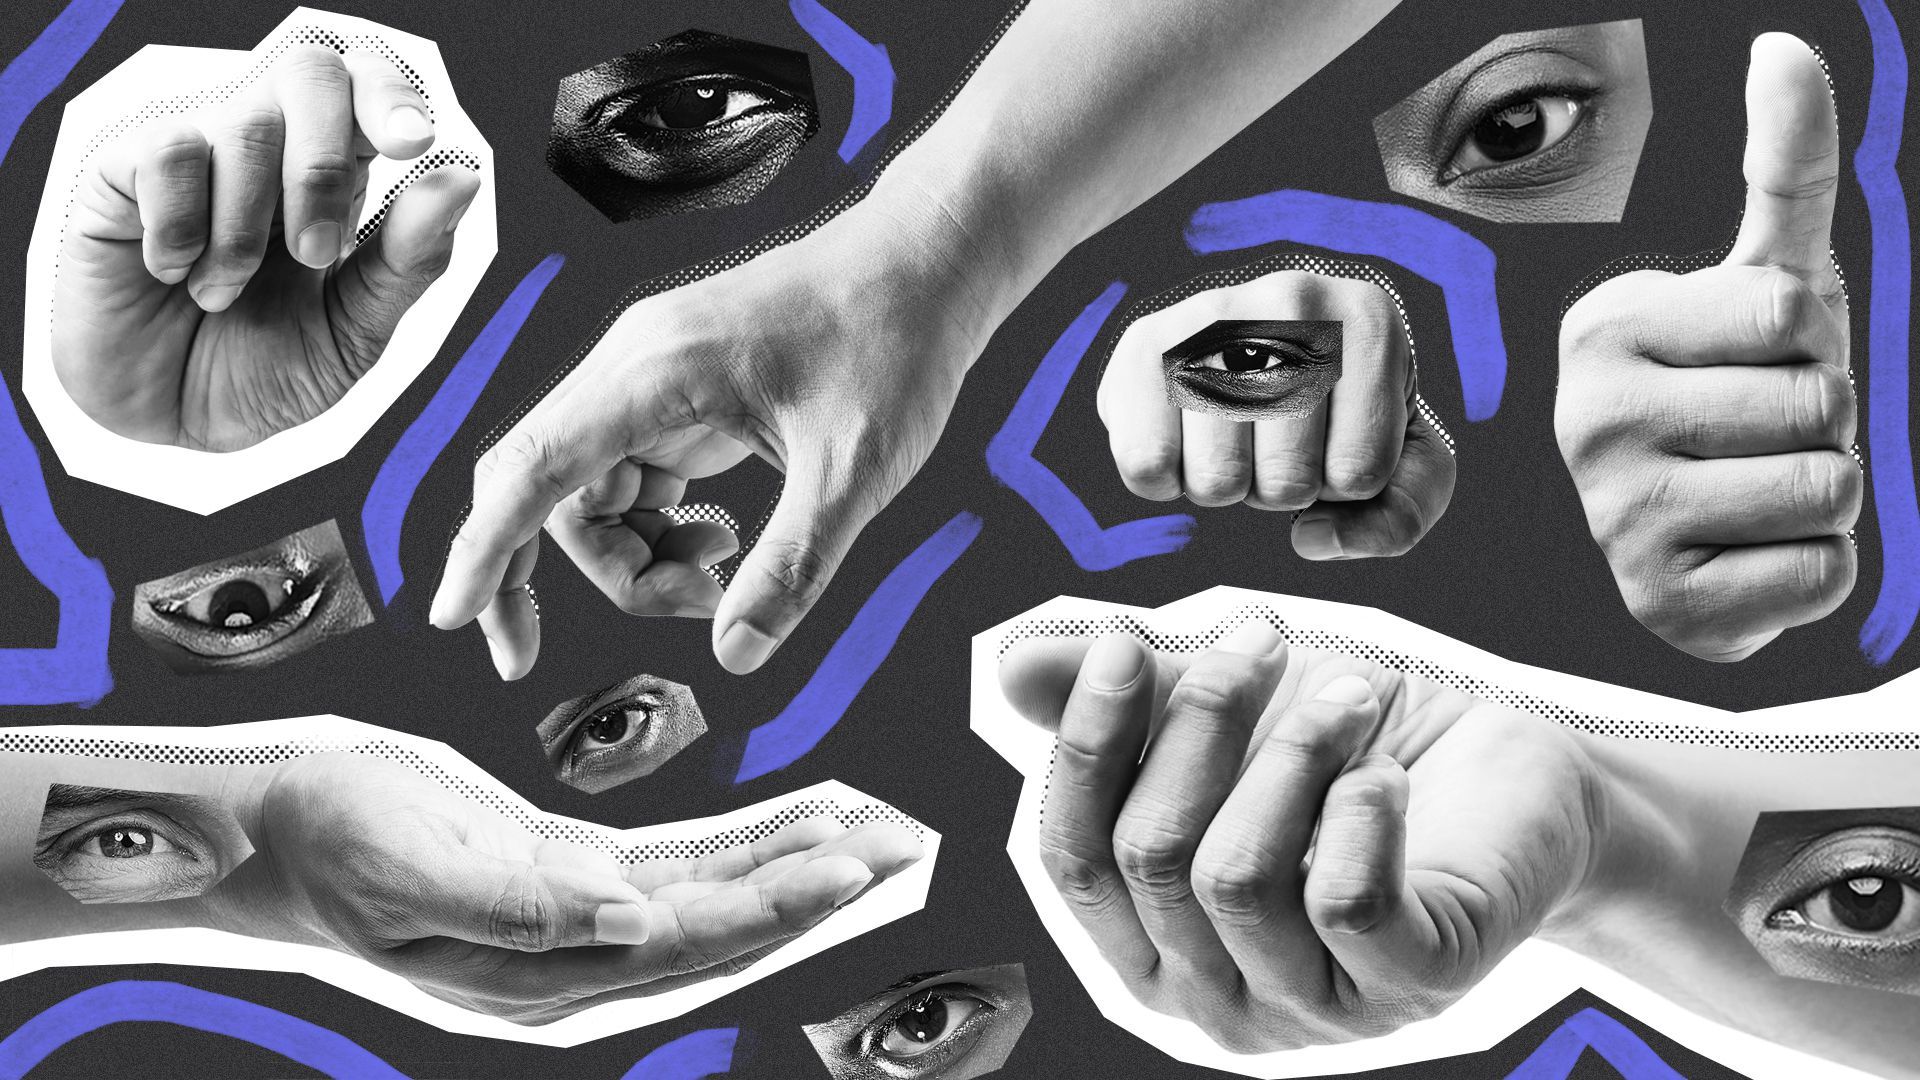 Illustrated collage of white hands with cut out eyes.